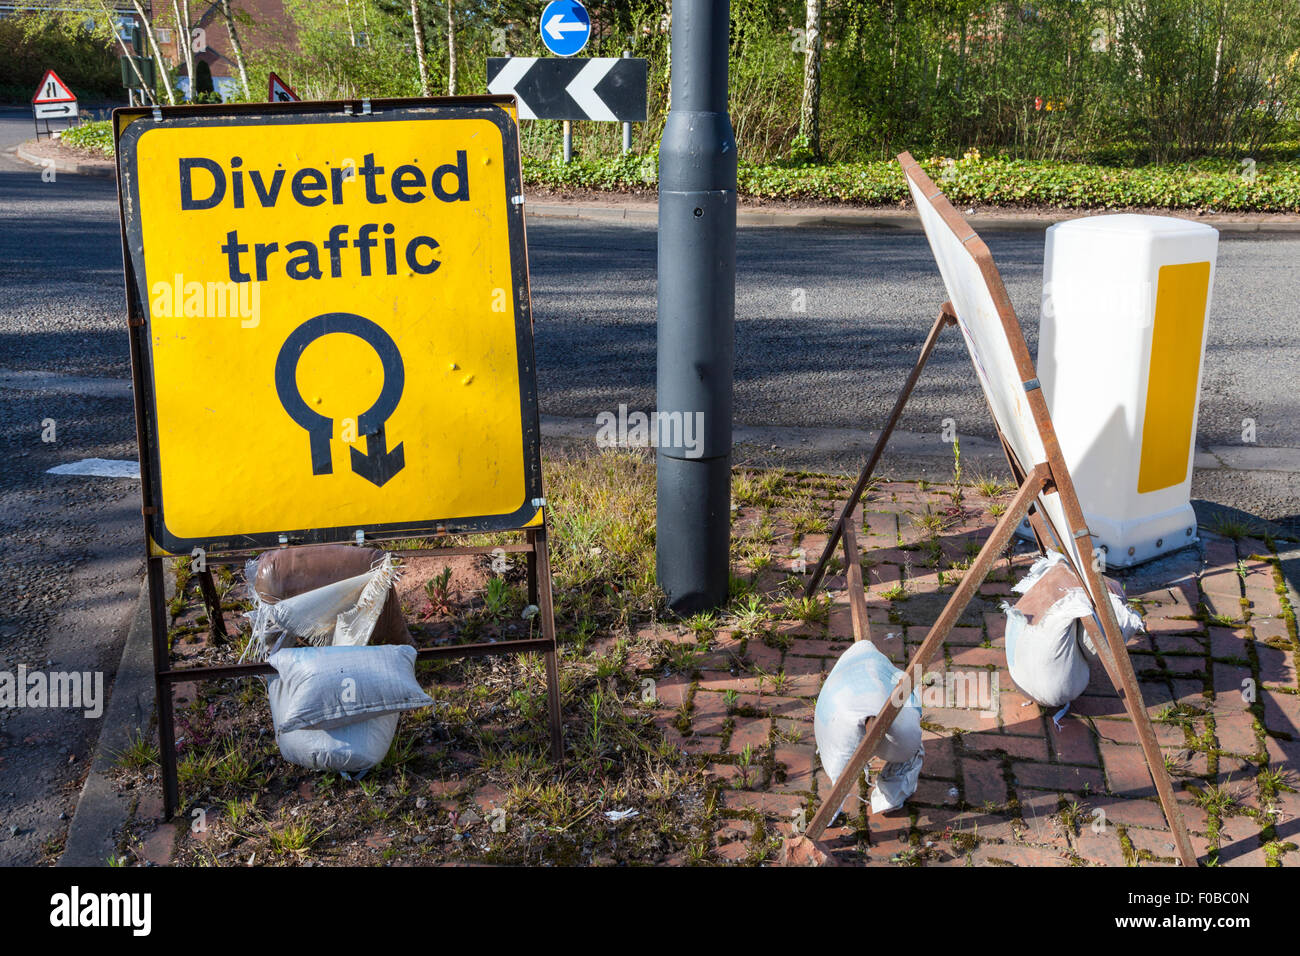 Diverted traffic sign. Road sign showing a diversion all the way around a roundabout, West Midlands, England, UK Stock Photo